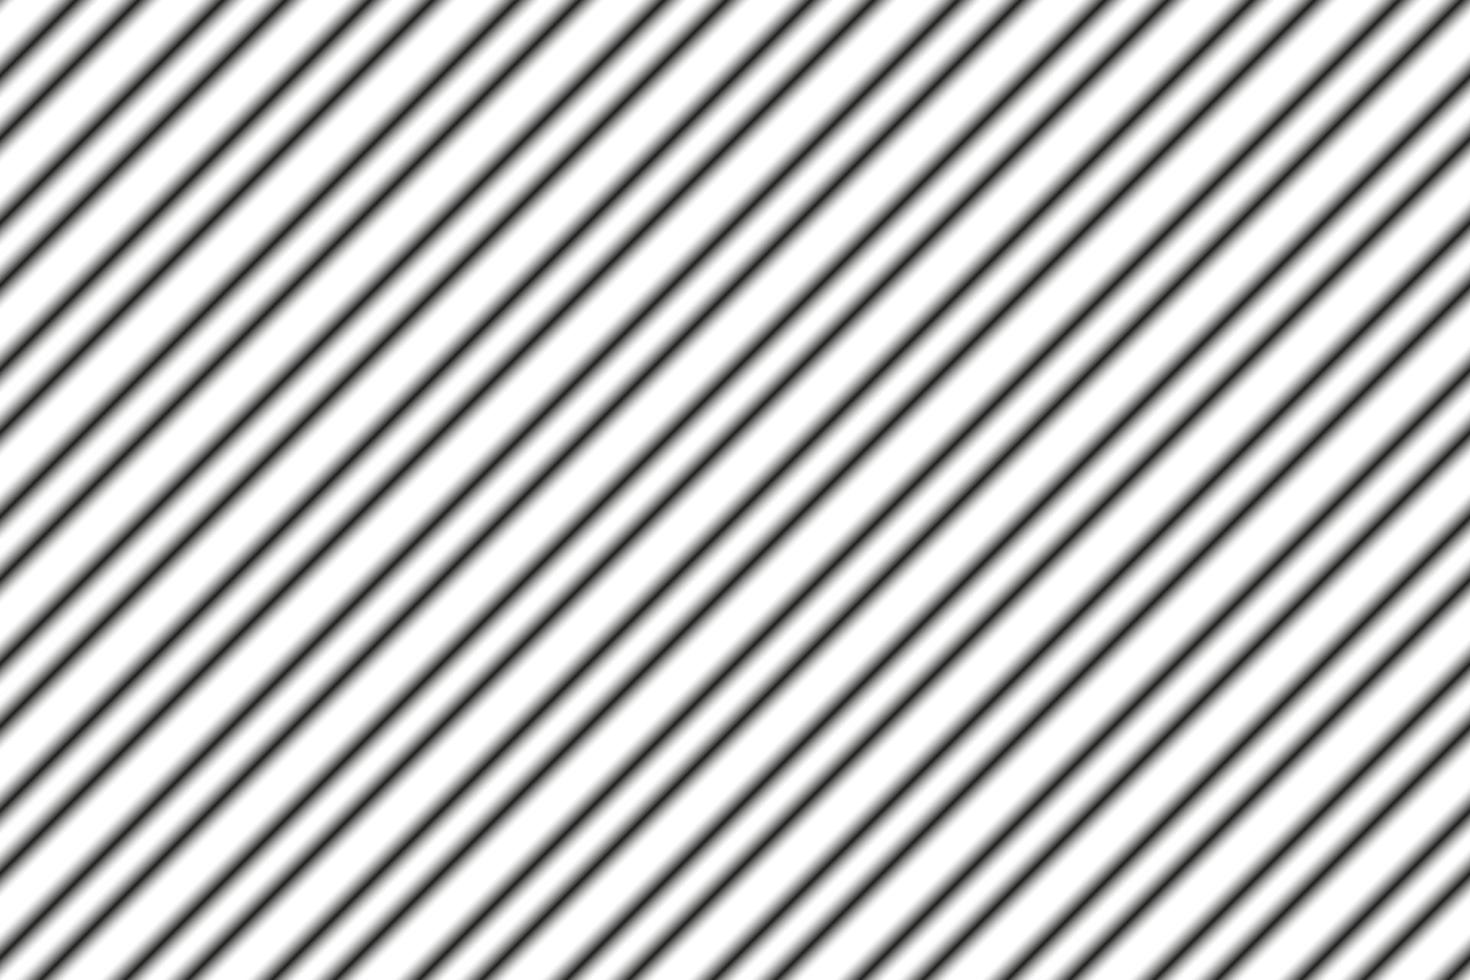 Black and White Striped Pattern Background vector